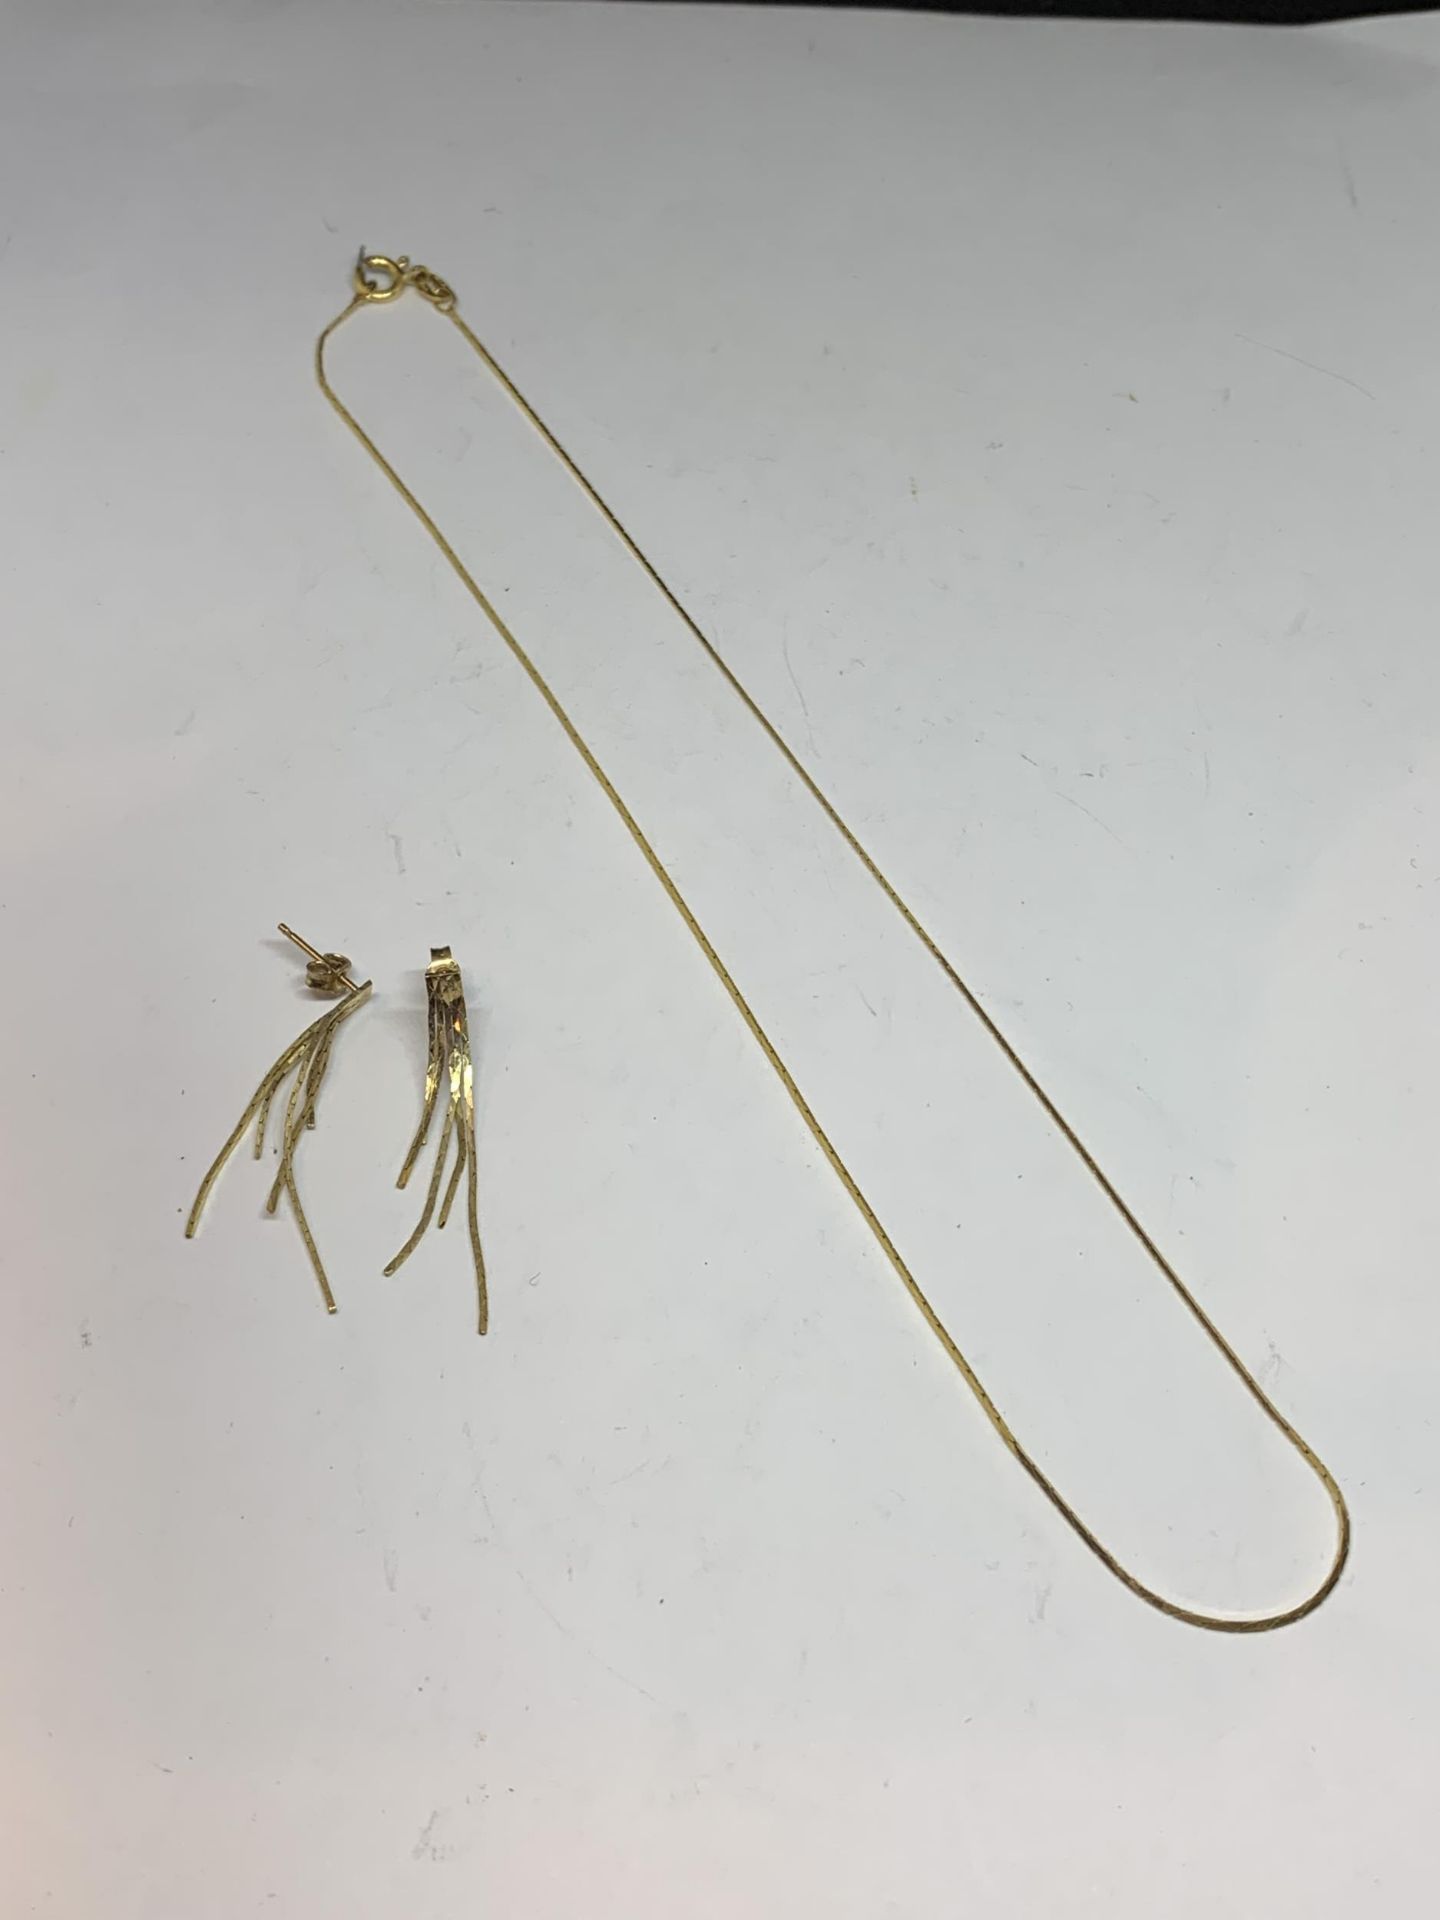 A 9 CARAT GOLD NECLACE AND A PAIR OF EARRINGS GROSS WEIGHT 2.9 GRAMS